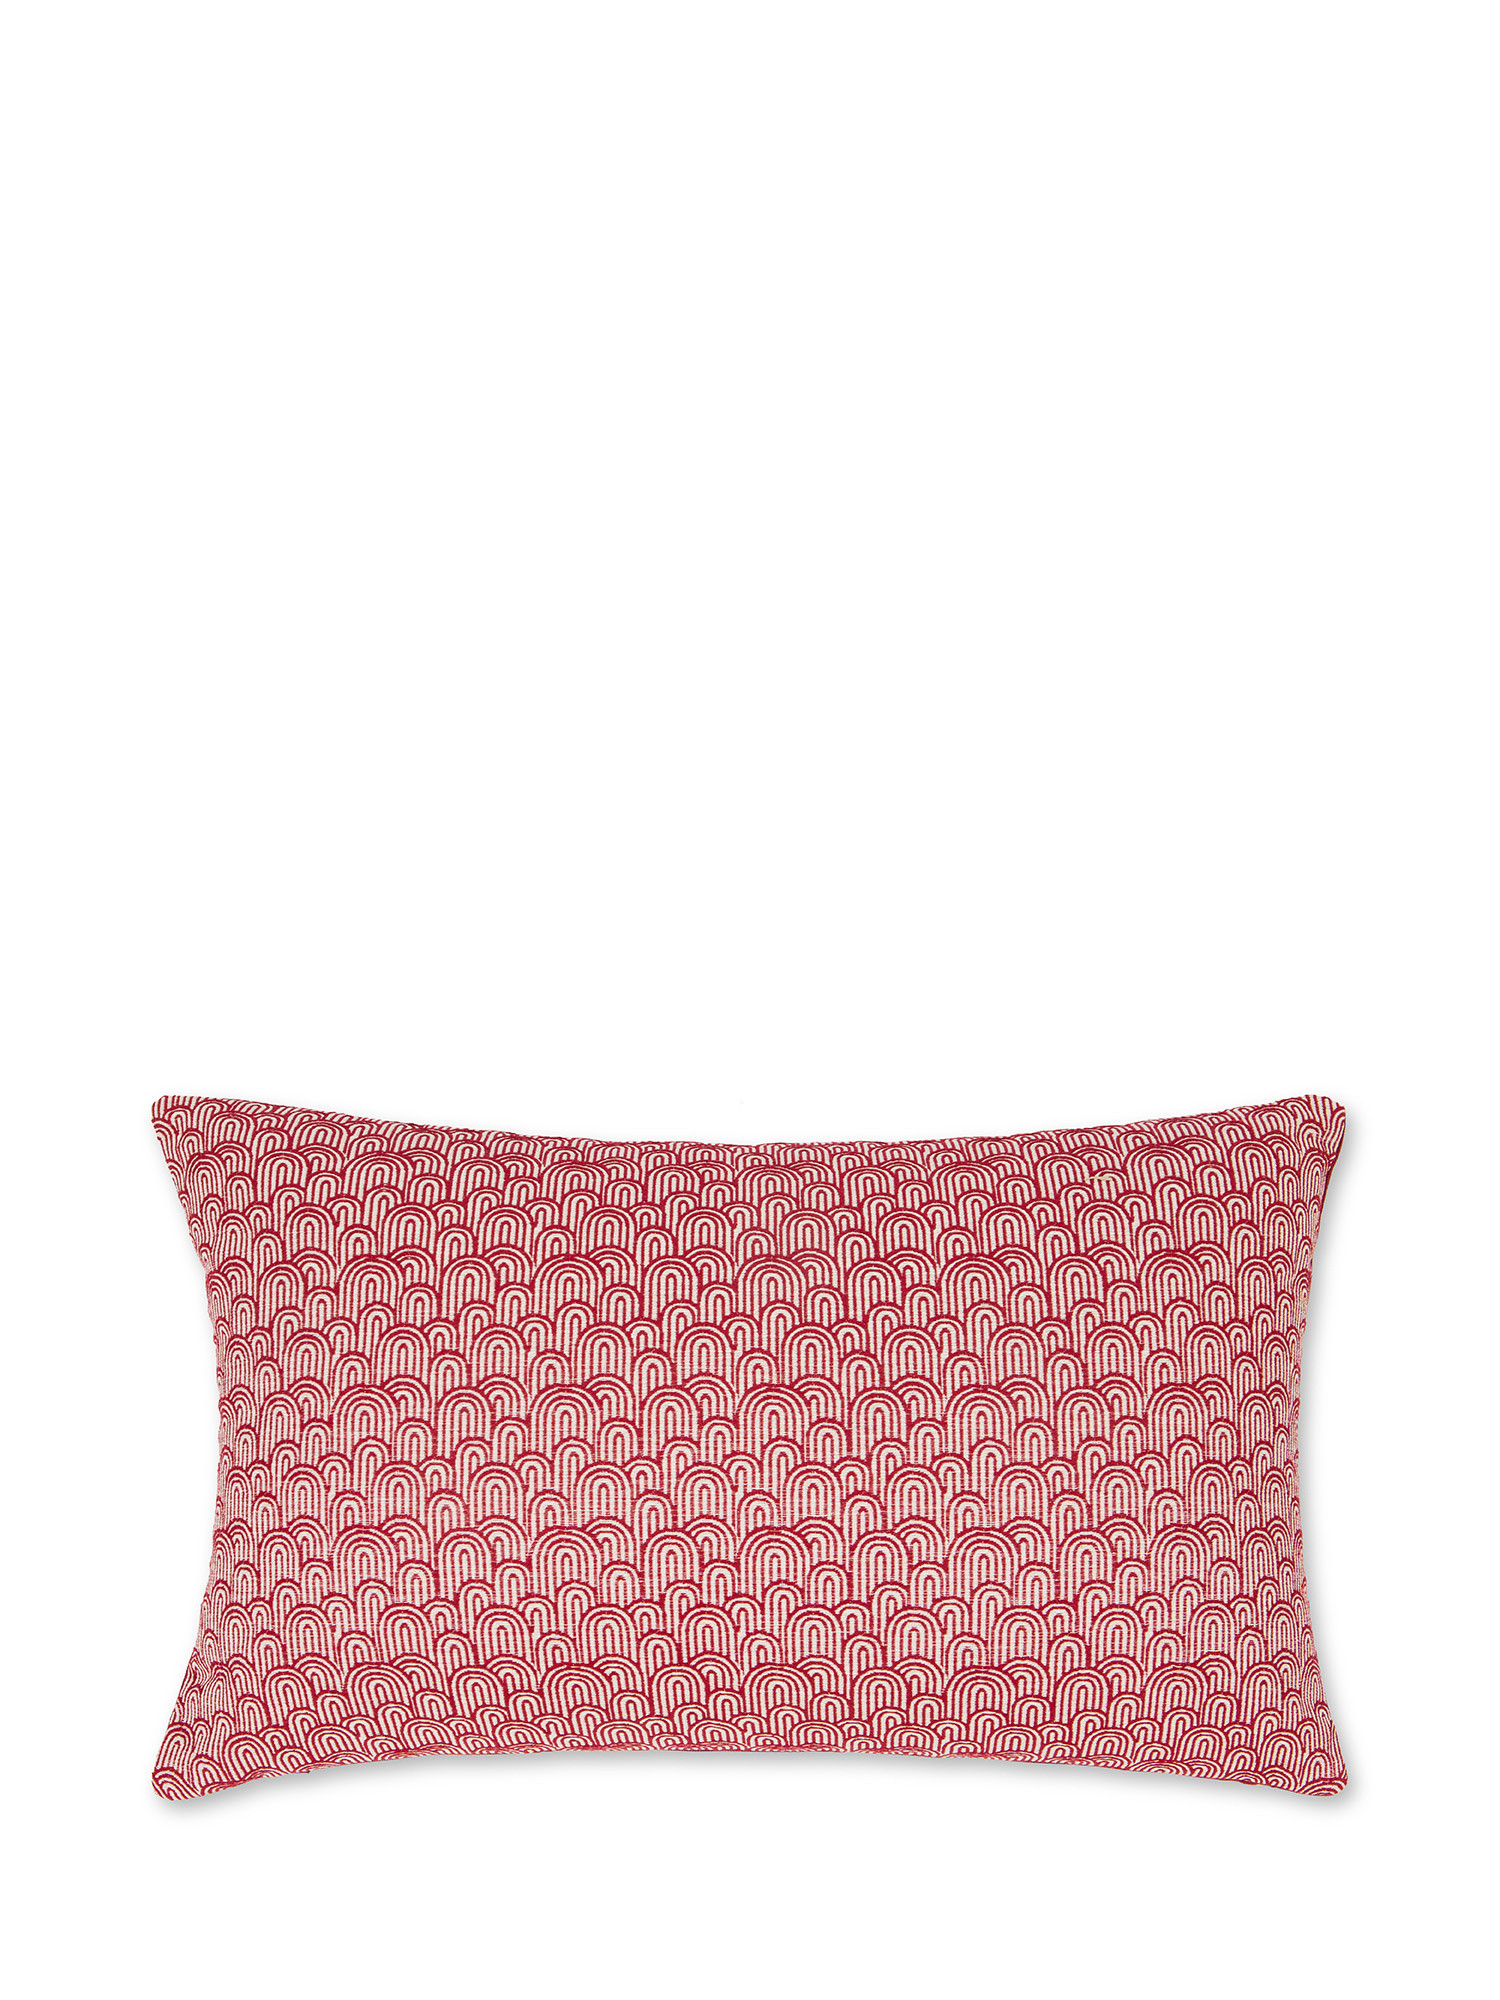 Jacquard fabric cushion with geometric pattern 35X55cm, Red, large image number 0